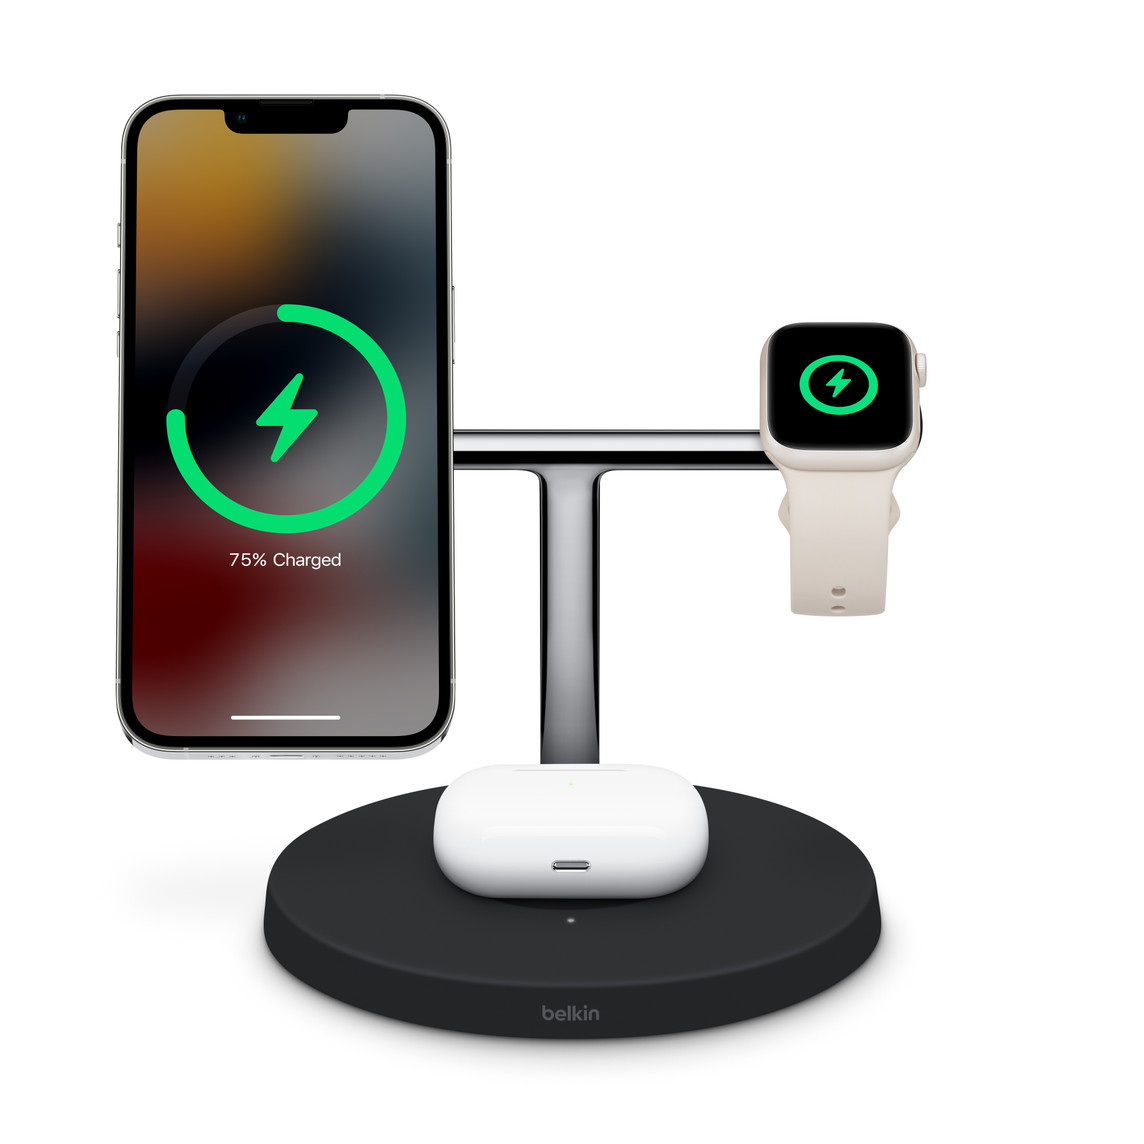 Belkin Boost Charge Pro 3-in-1 Wireless Charger with MagSafe simultaneously charges iPhone, Apple Watch and Wireless Charging Case for AirPods.